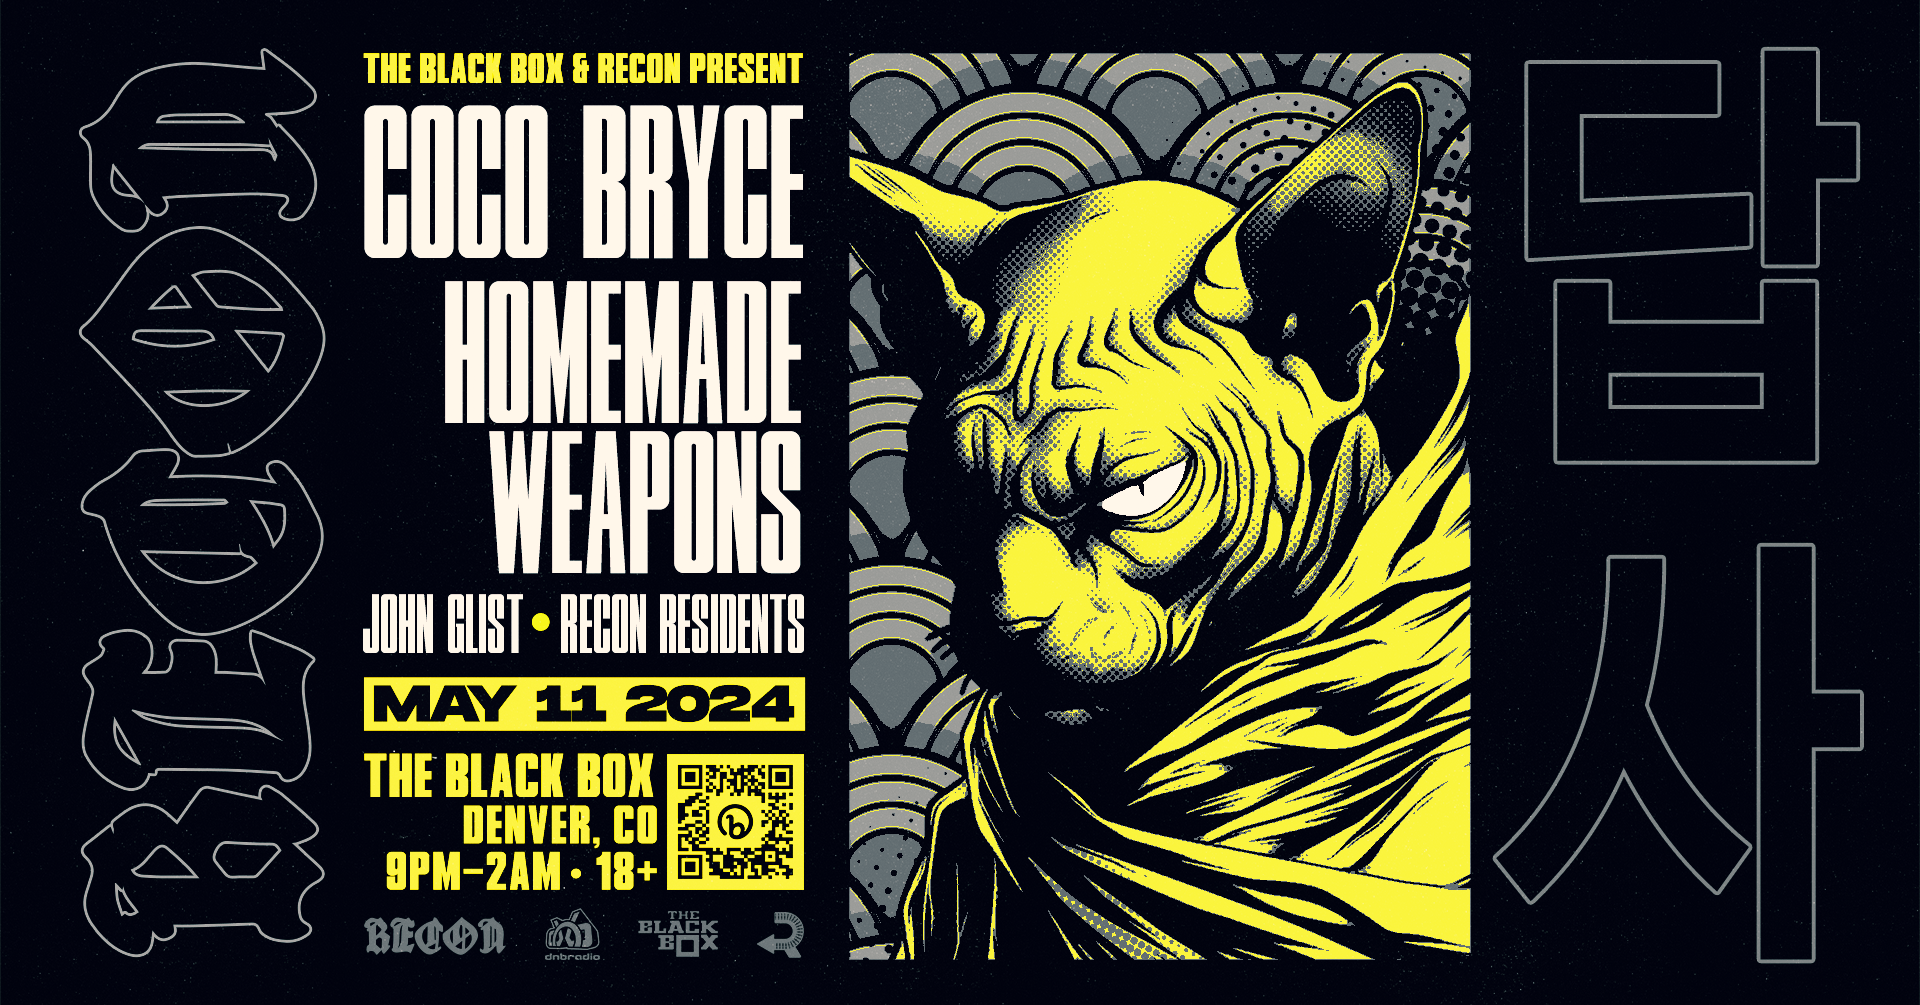 Recon presents Coco Bryce, Homemade Weapons, John Glist & Recon Residents - フライヤー裏